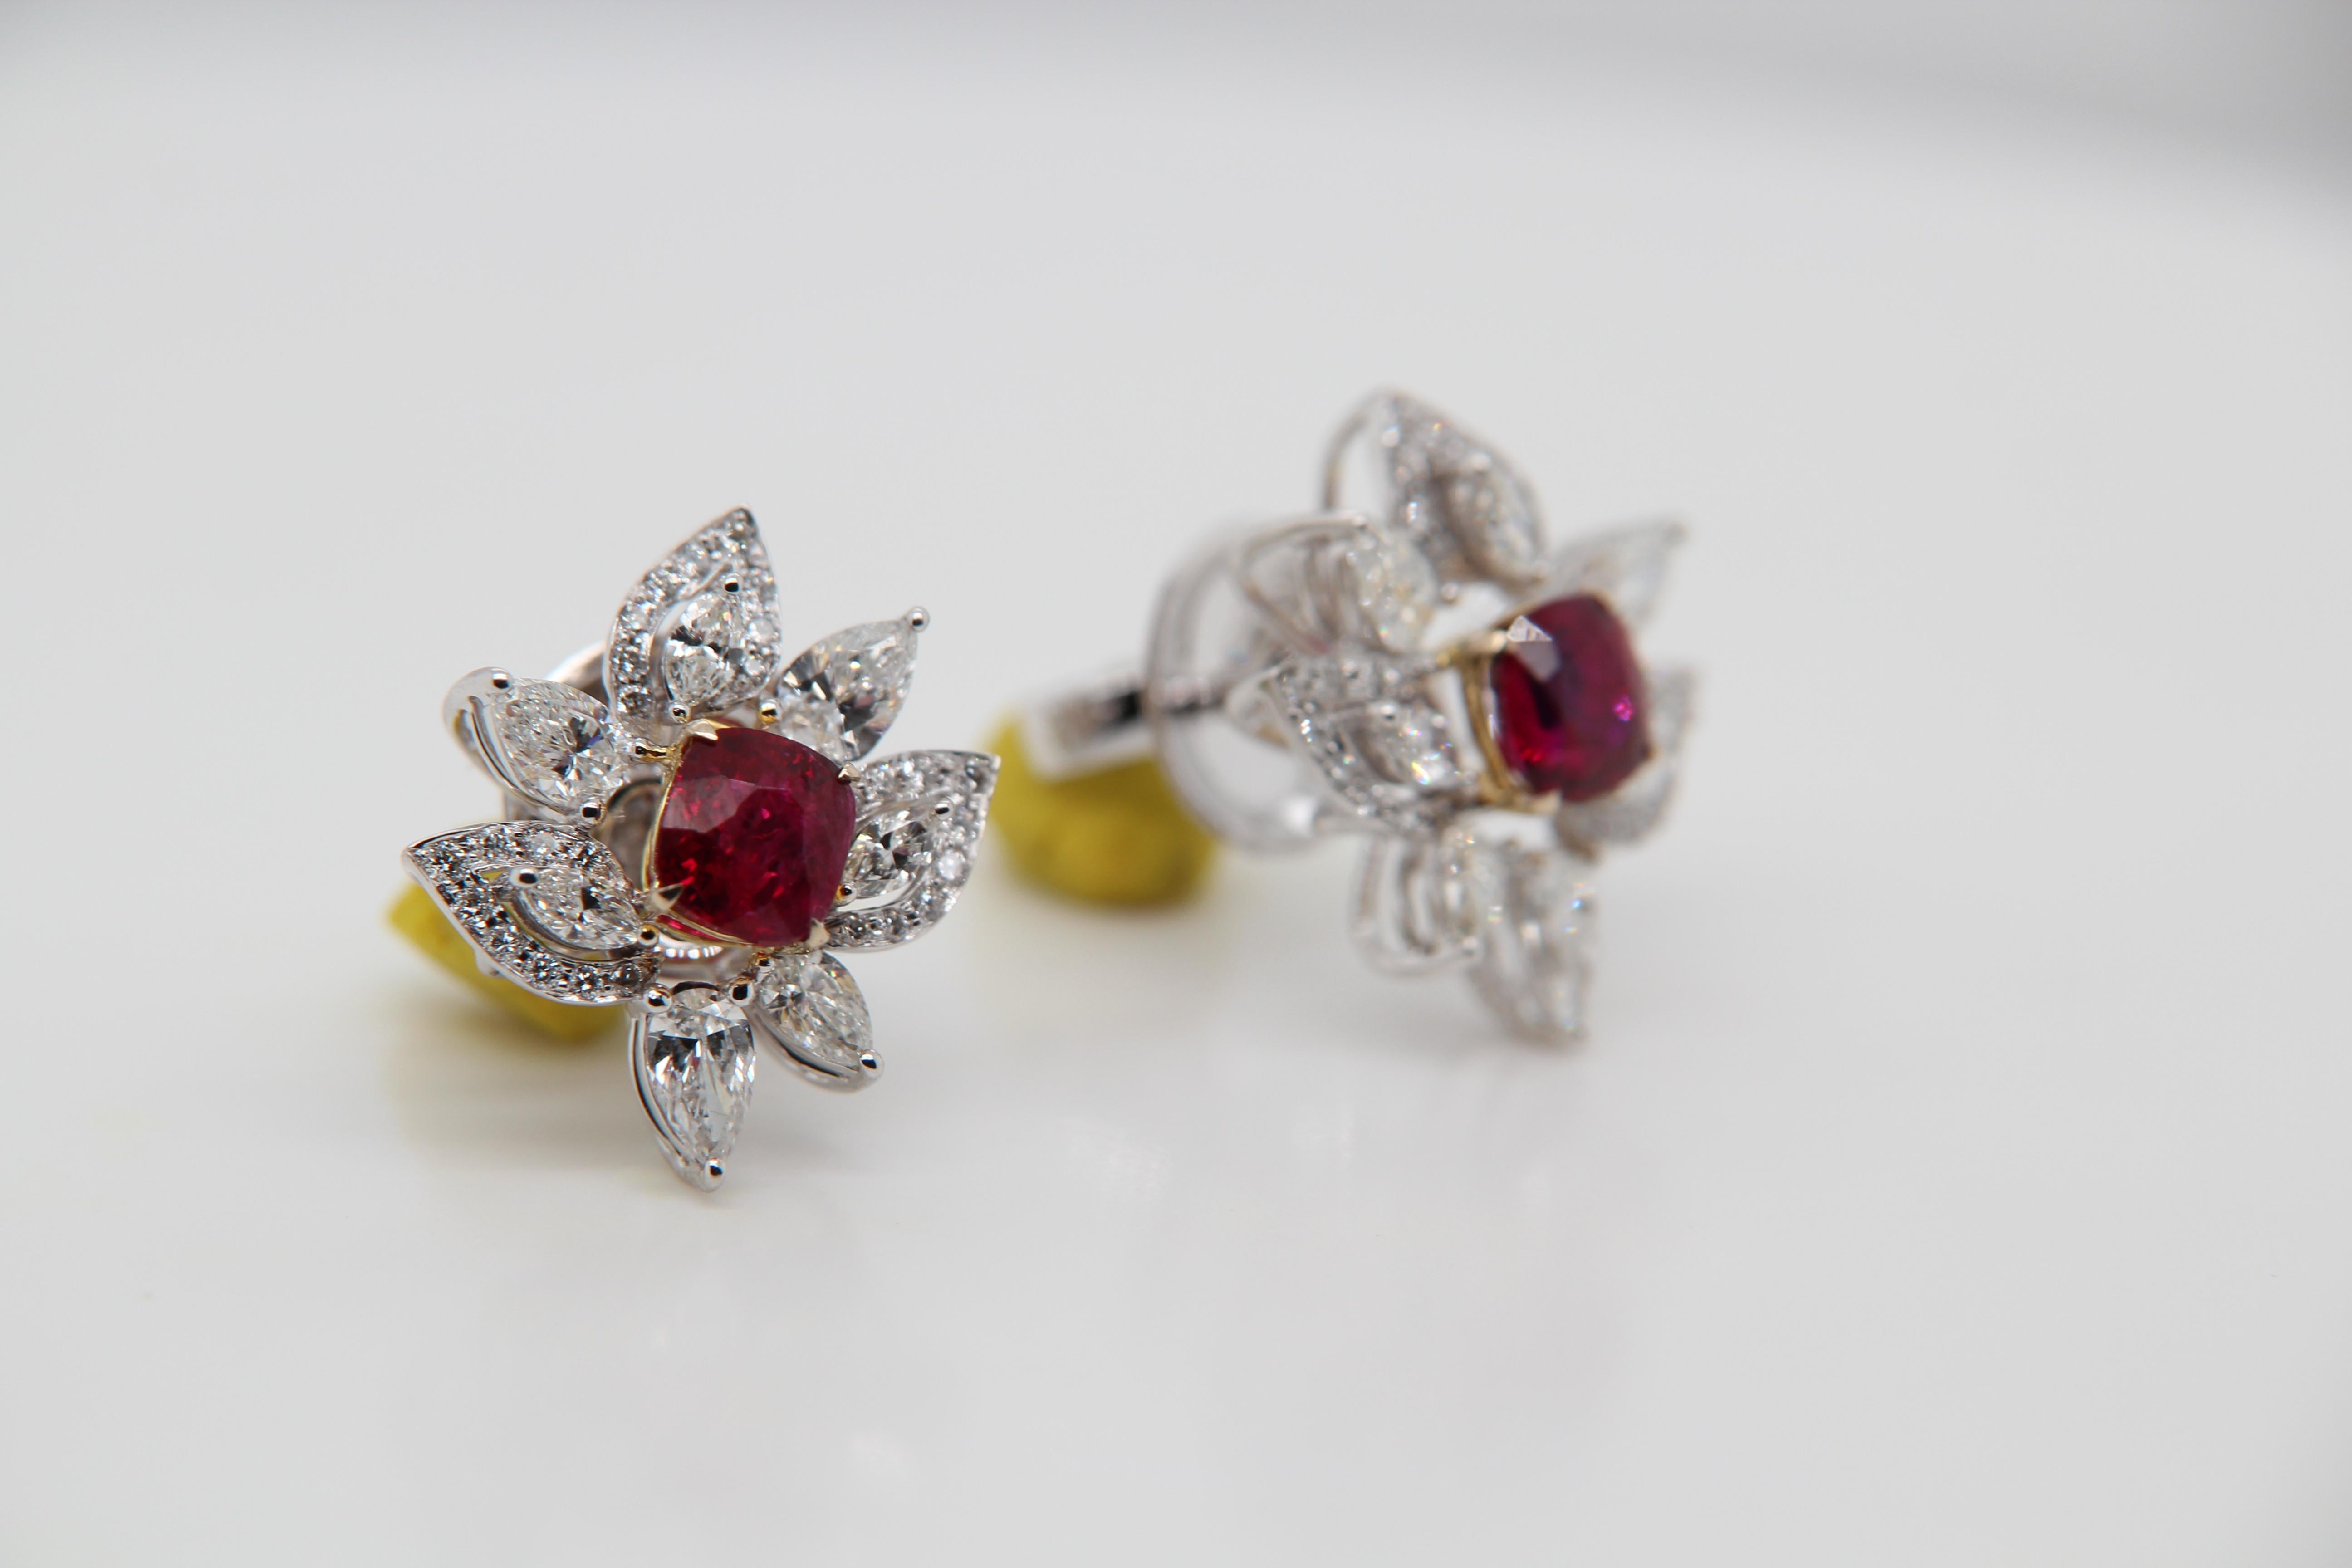 A new 2.23 carat Burmese ruby earring mounted with diamonds in 18 Karat gold. The ruby weighs 1.13 and 1.10 carats and are certified by Gem Research Swisslab (GRS) as natural, no heat, and 'Vivid Red Pigeon's Blood'. The total diamond weight is 3.07